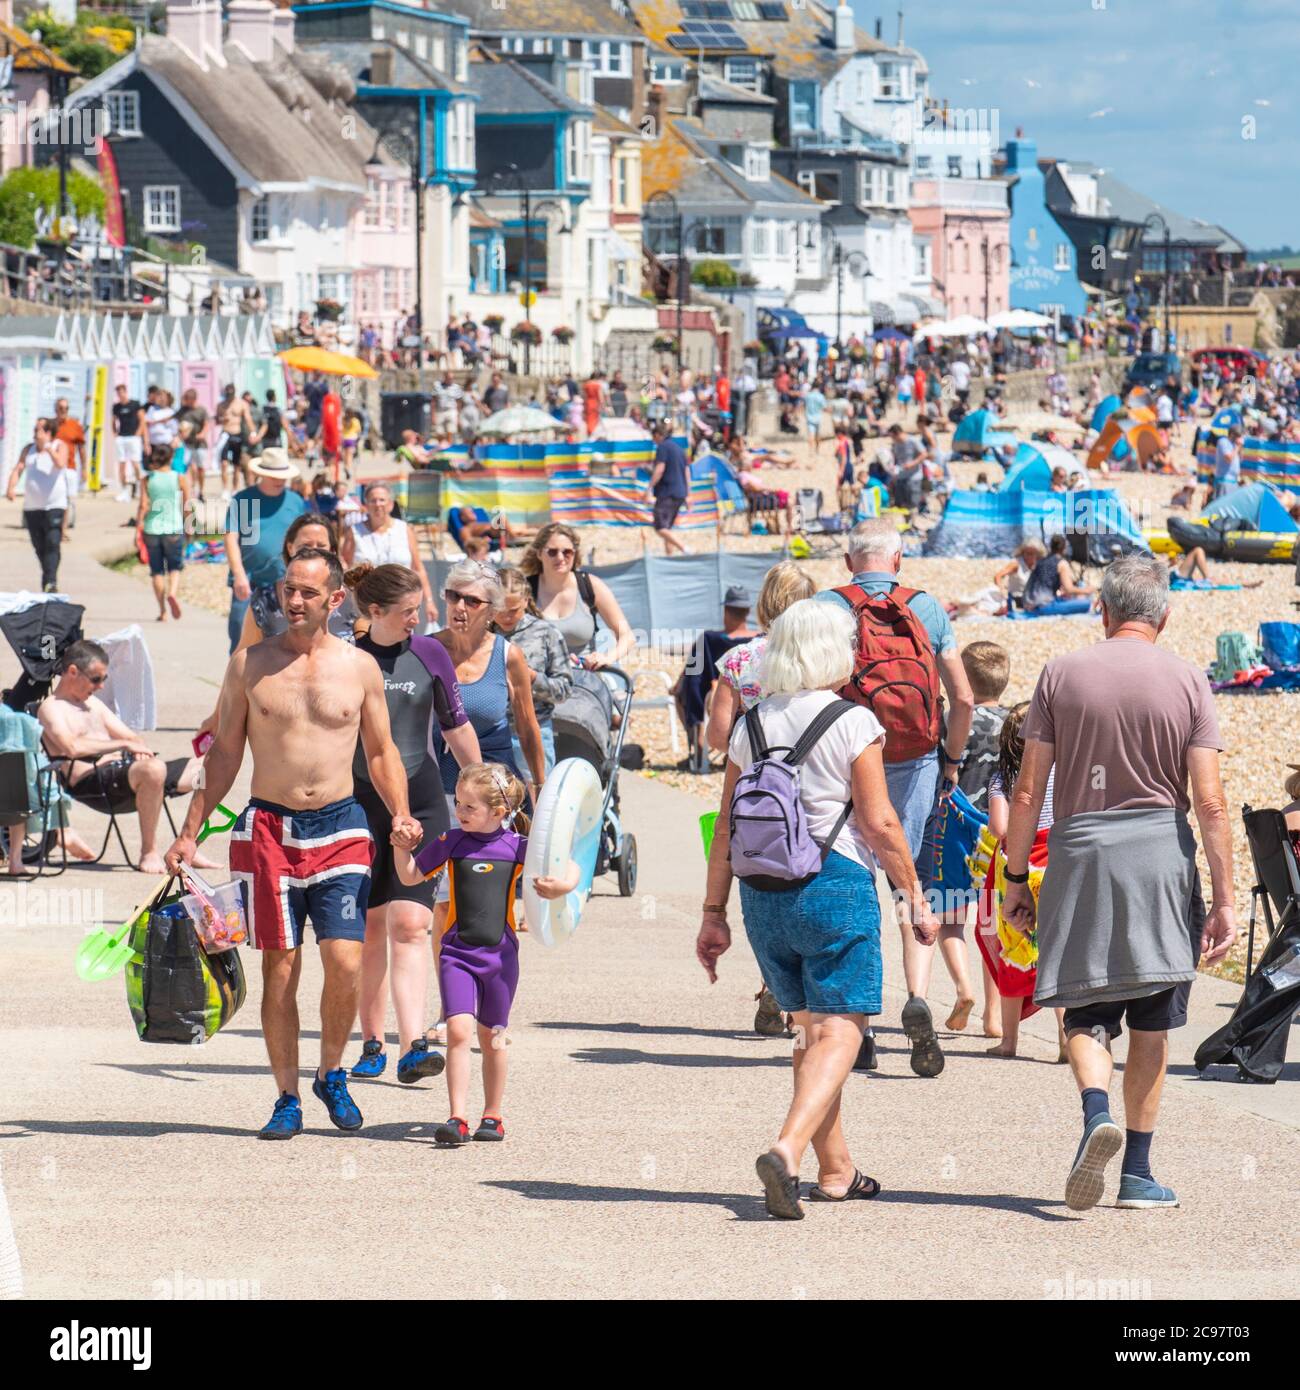 Lyme Regis, Dorset, UK. 29th July, 2020. UK Weather: The beach at the seaside resort of Lyme Regis was packed with sunseekers and families soaking up the scorching hot sunshine this afternoon. Credit: Celia McMahon/Alamy Live News Stock Photo